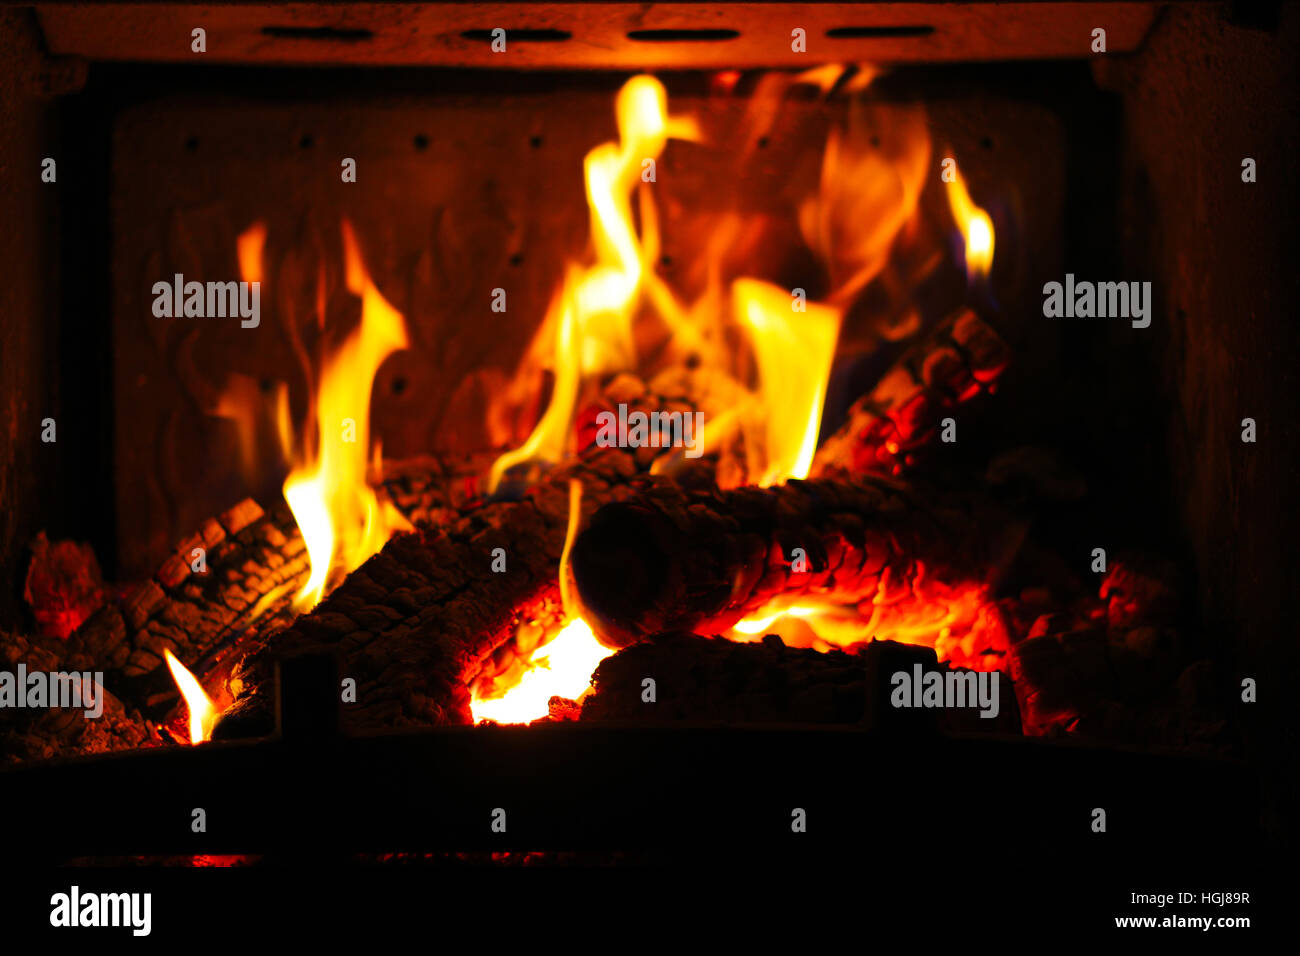 Burning Wood In The Fireplace Stock Photo Alamy